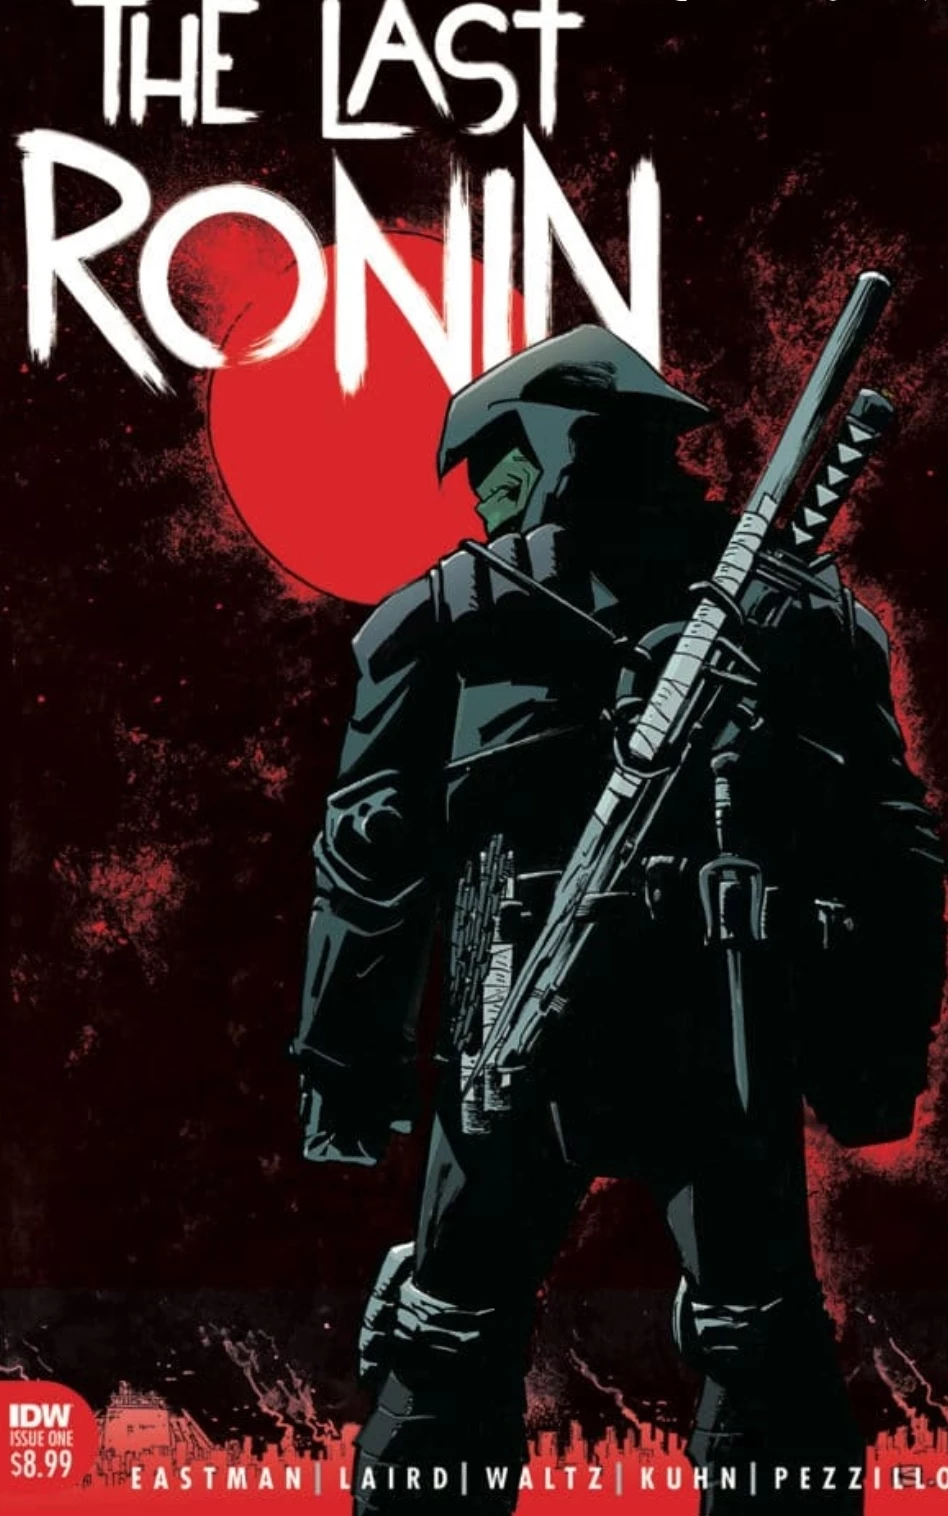 download rise of ronin